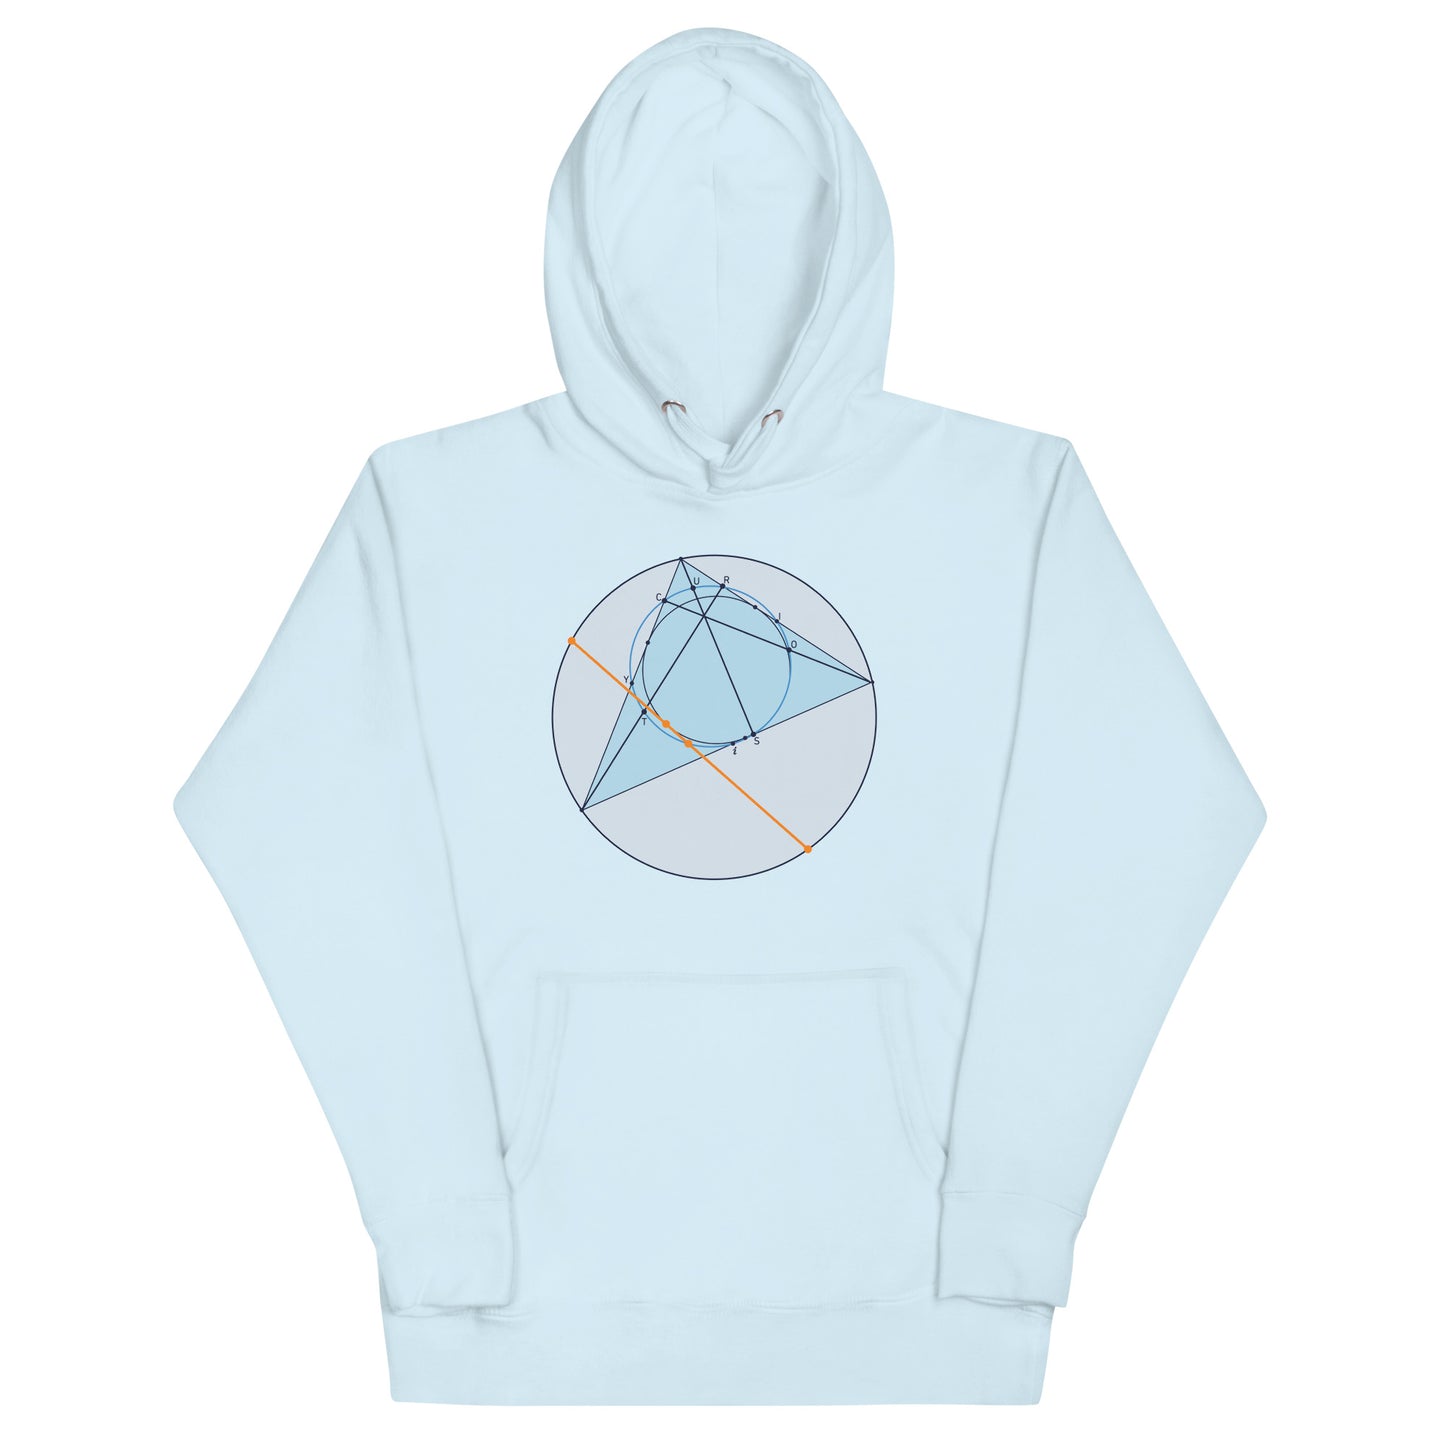 4th Side of the Triangle Hoodie